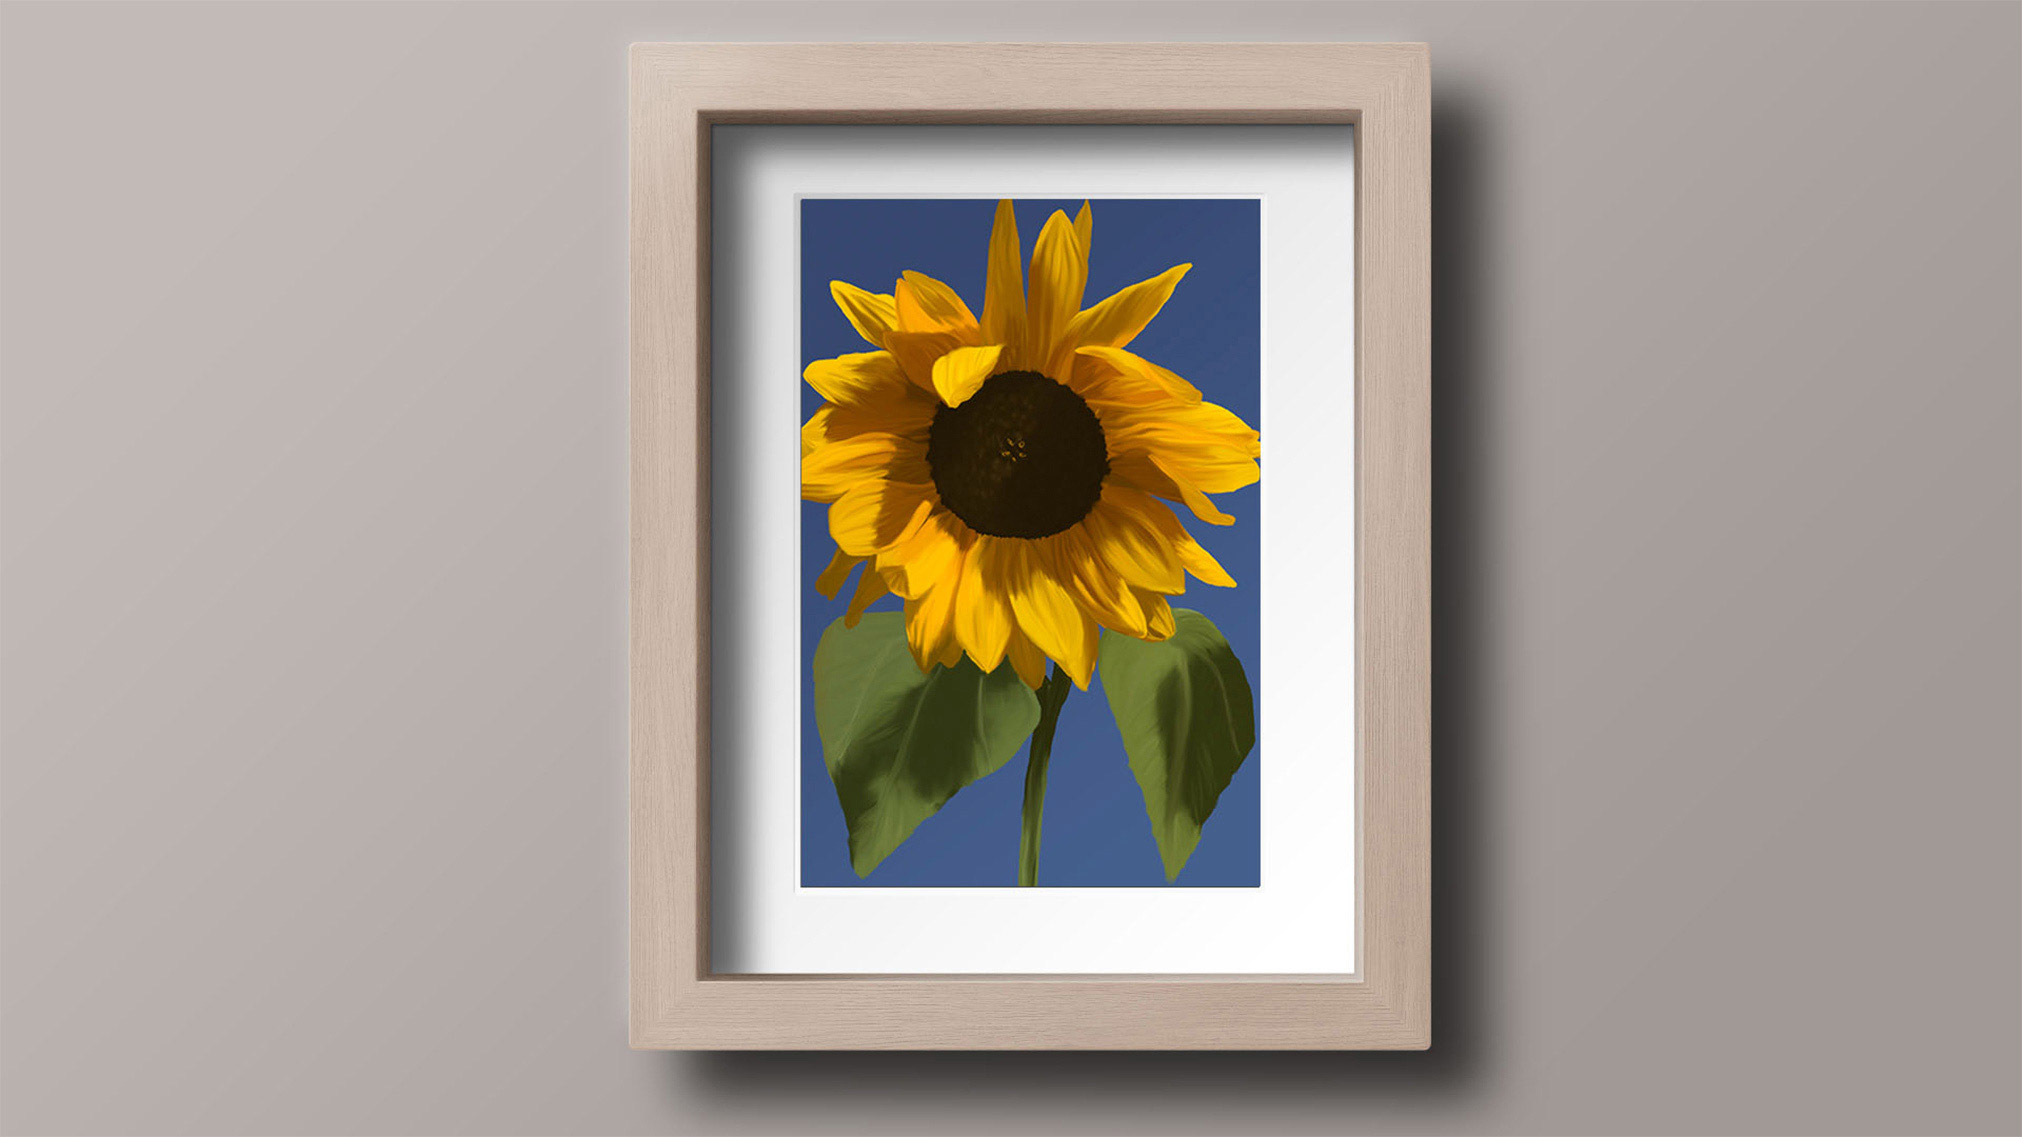 This pastel sunflower painting was created digitally using Photoshop.
